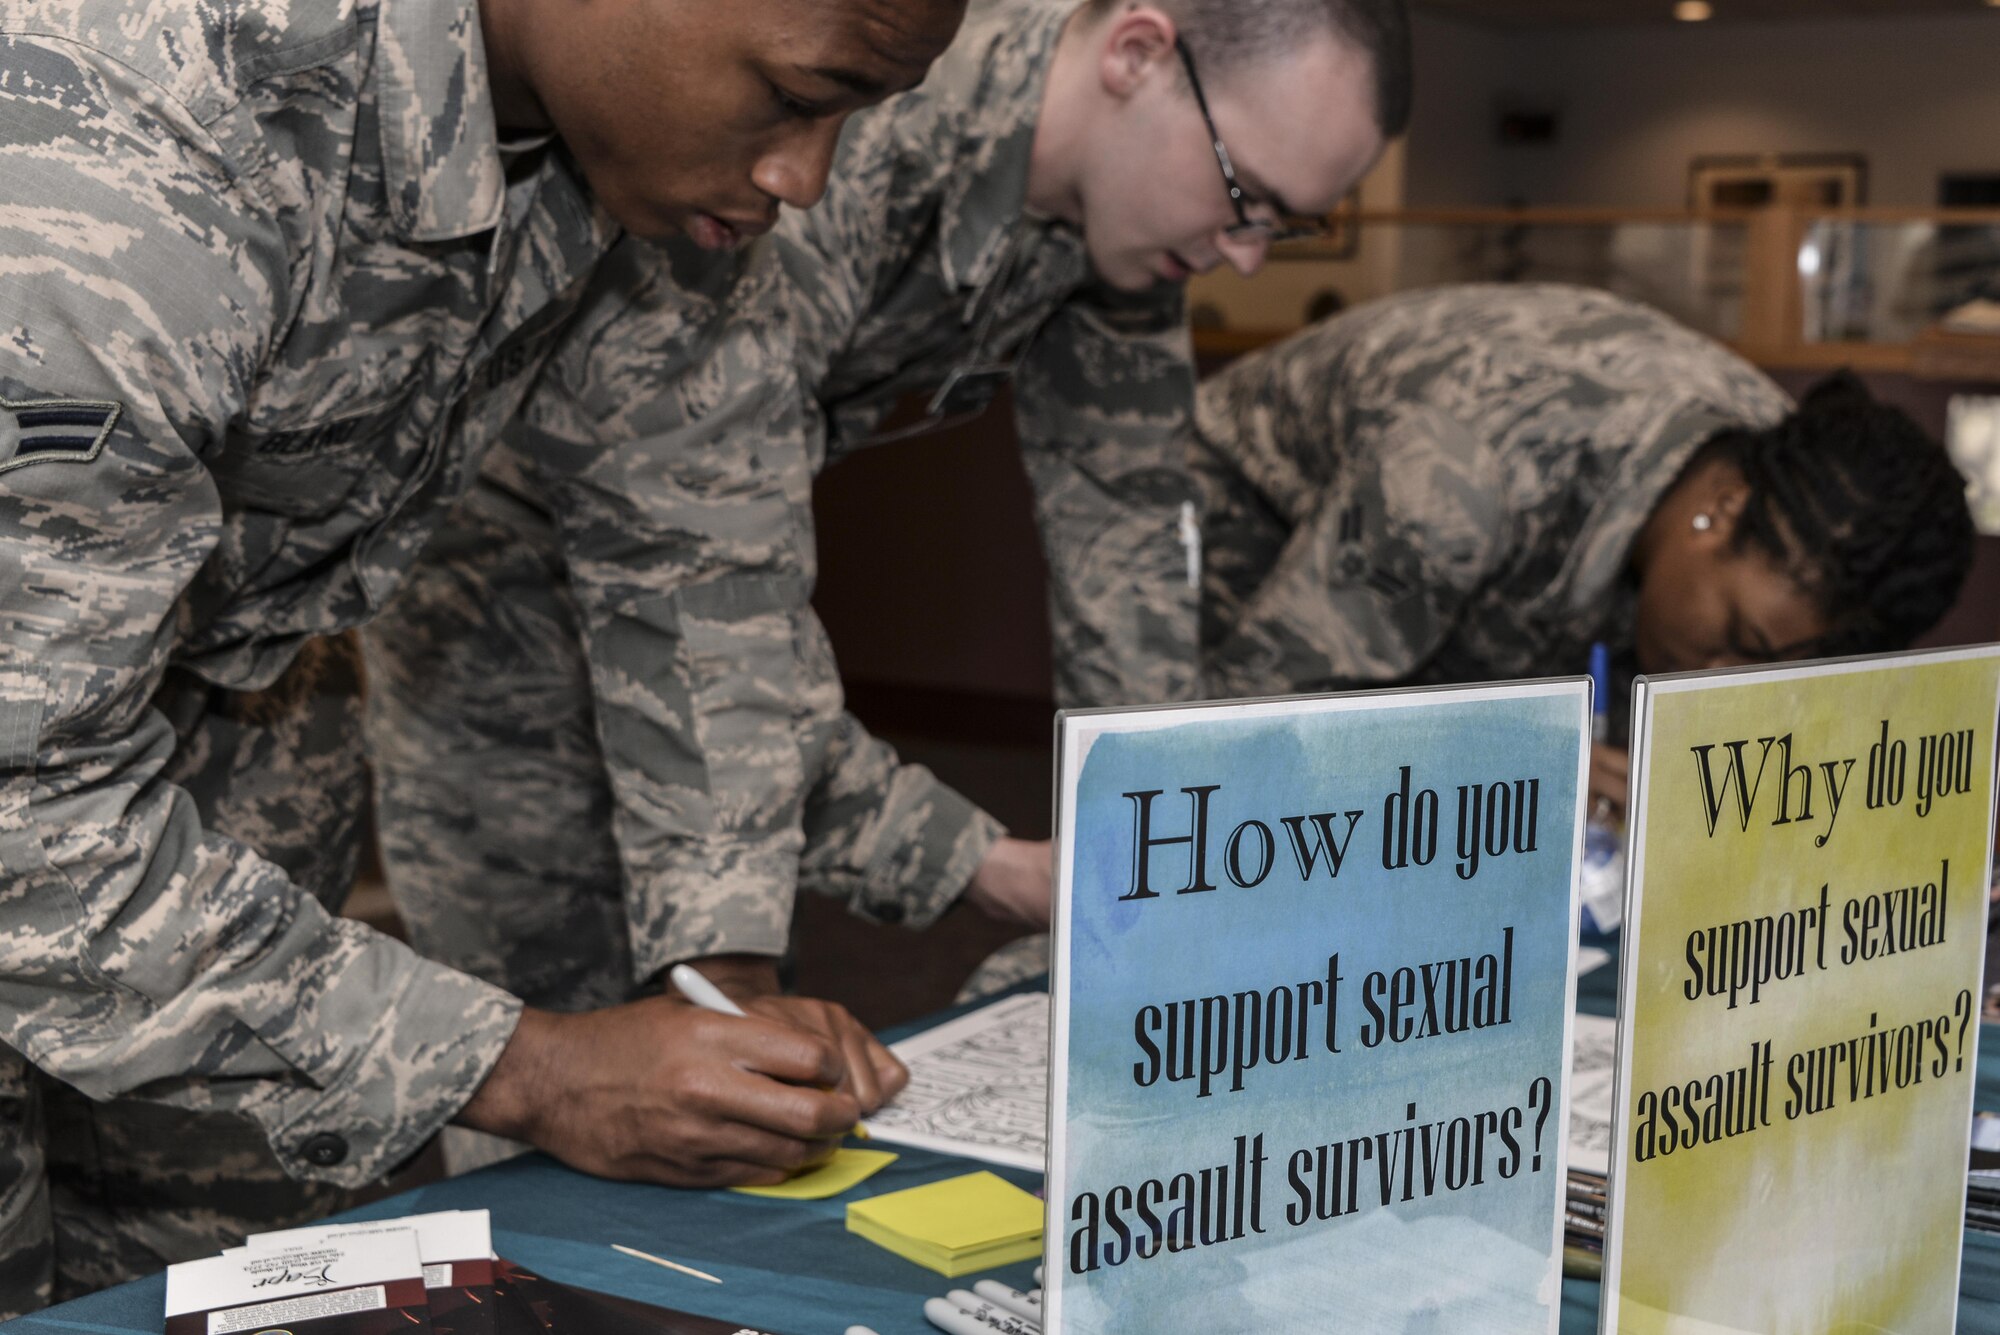 Airmen from the 70th Intelligence, Surveillance and Reconnaissance Wing write messages to sexual assault survivors on sticky notes as part of the Stick with Survivors project April 13. Stick with Survivors is a project created by the 70th ISRW Sexual Assault Prevention and Response office that will assist military and civilian members in showing their support for sexual assault survivors. (U.S. Air Force photo by Staff Sgt. Alexandre Montes)